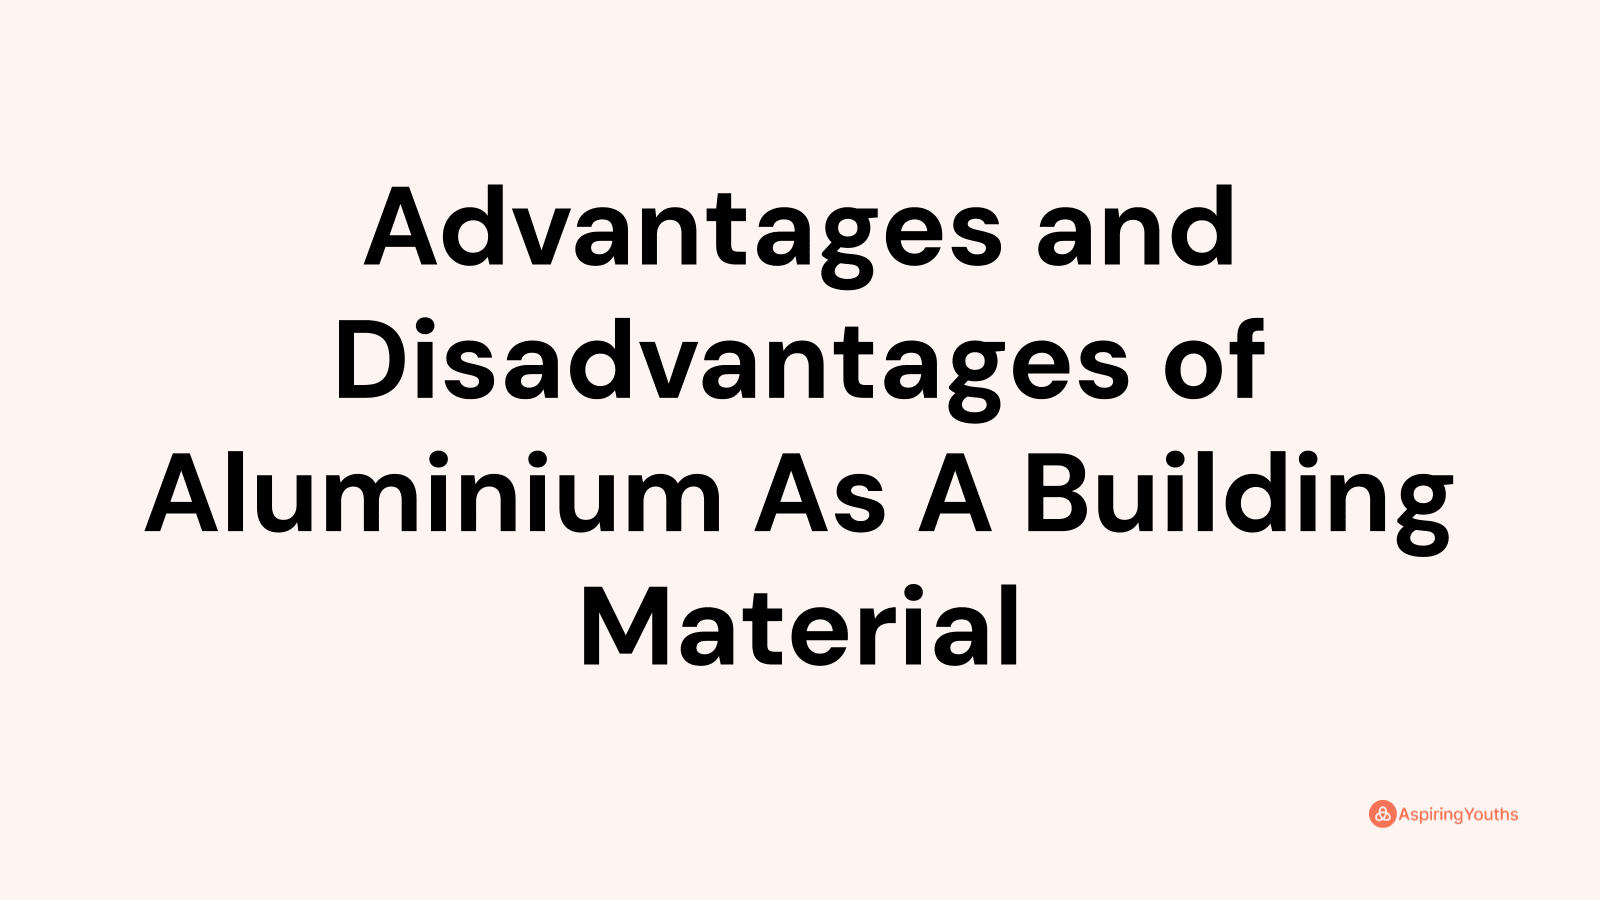 Advantages and disadvantages of Aluminium As A Building Material